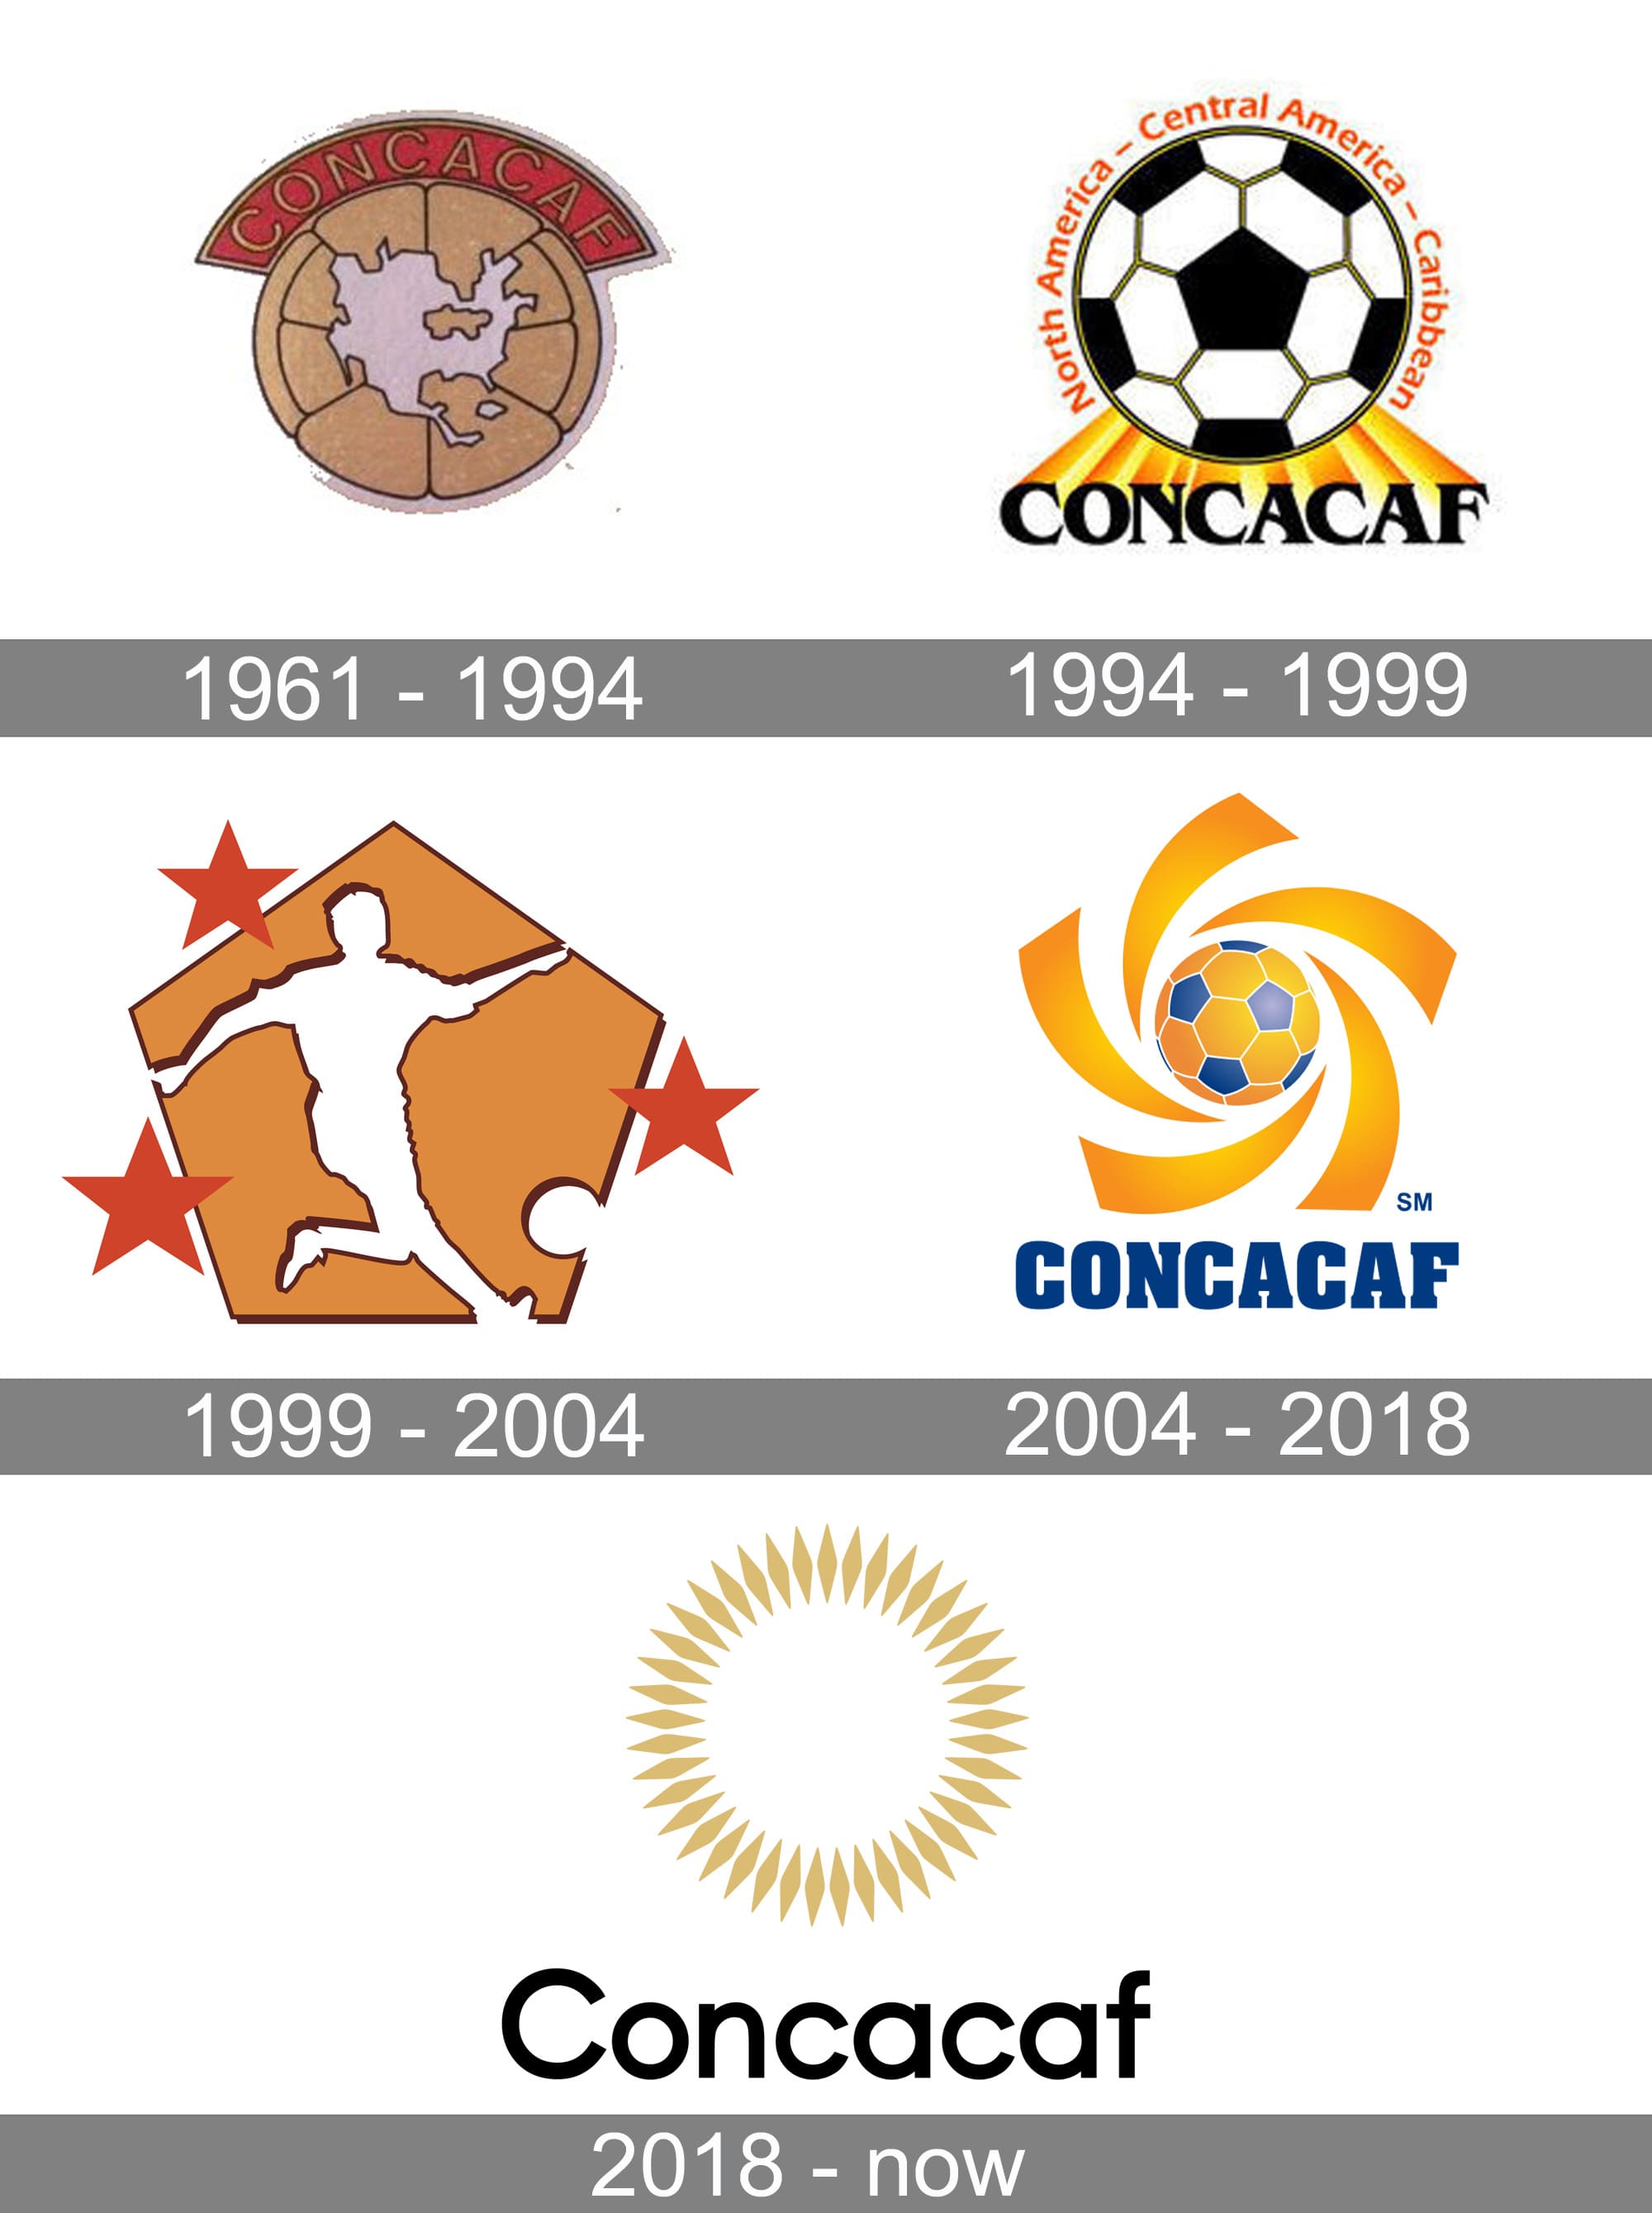 CONCACAF logo and symbol, meaning, history, PNG, brand